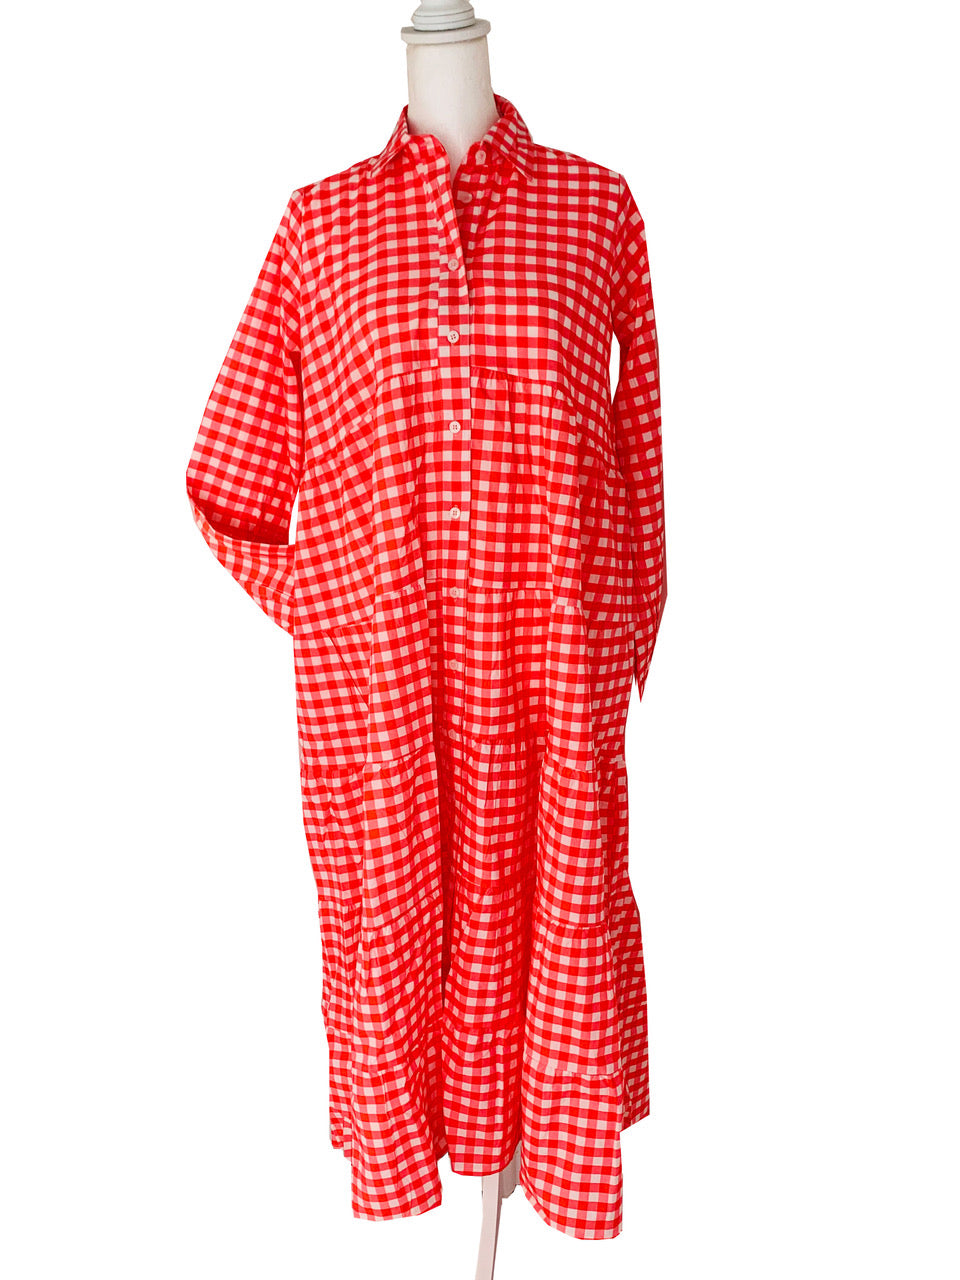 Becky Tiered Dress - ORGANIC COTTON - Coral Gingham